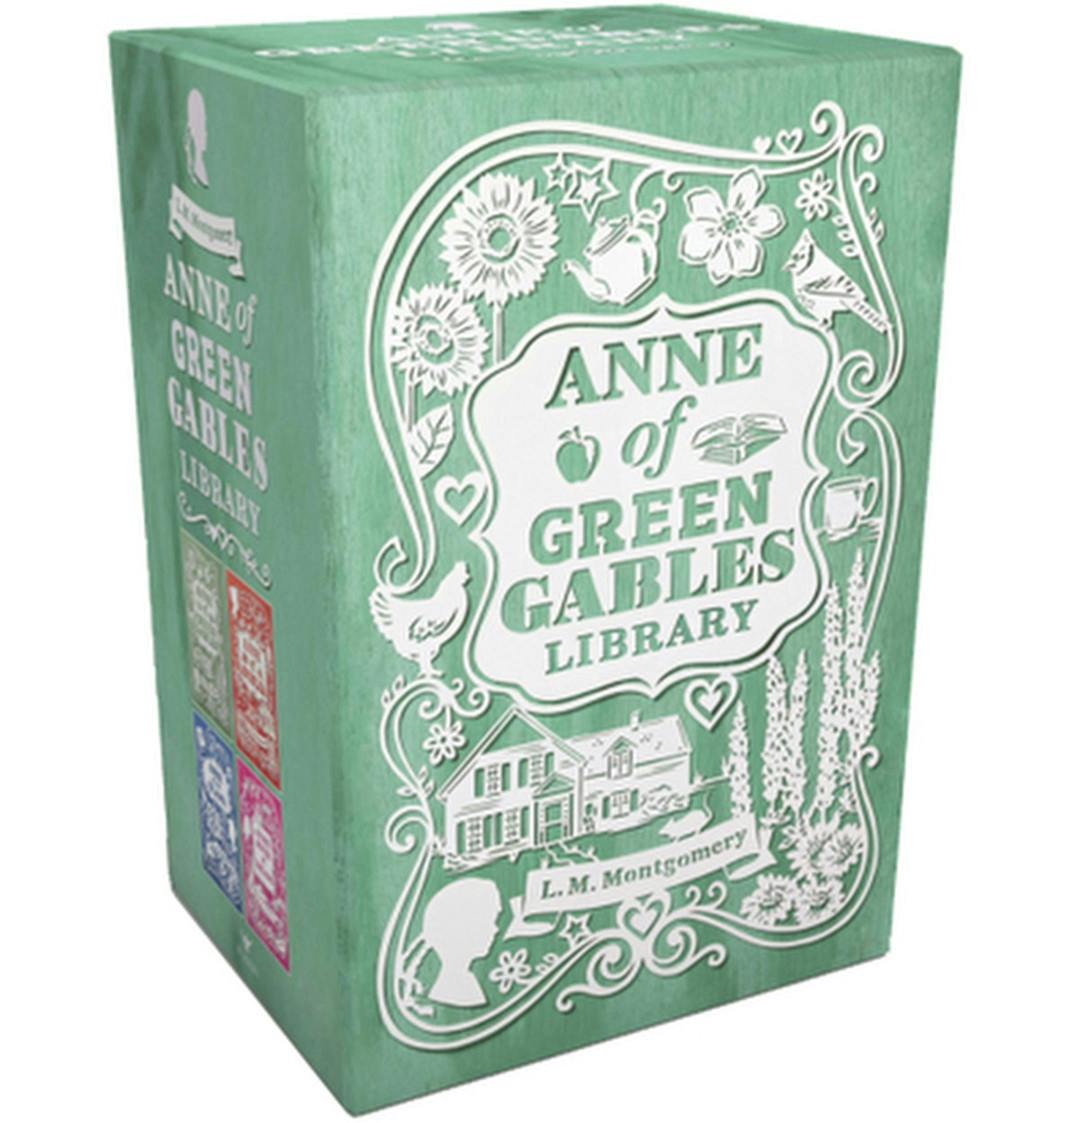 Anne of Green Gables Library (Books 1-4)